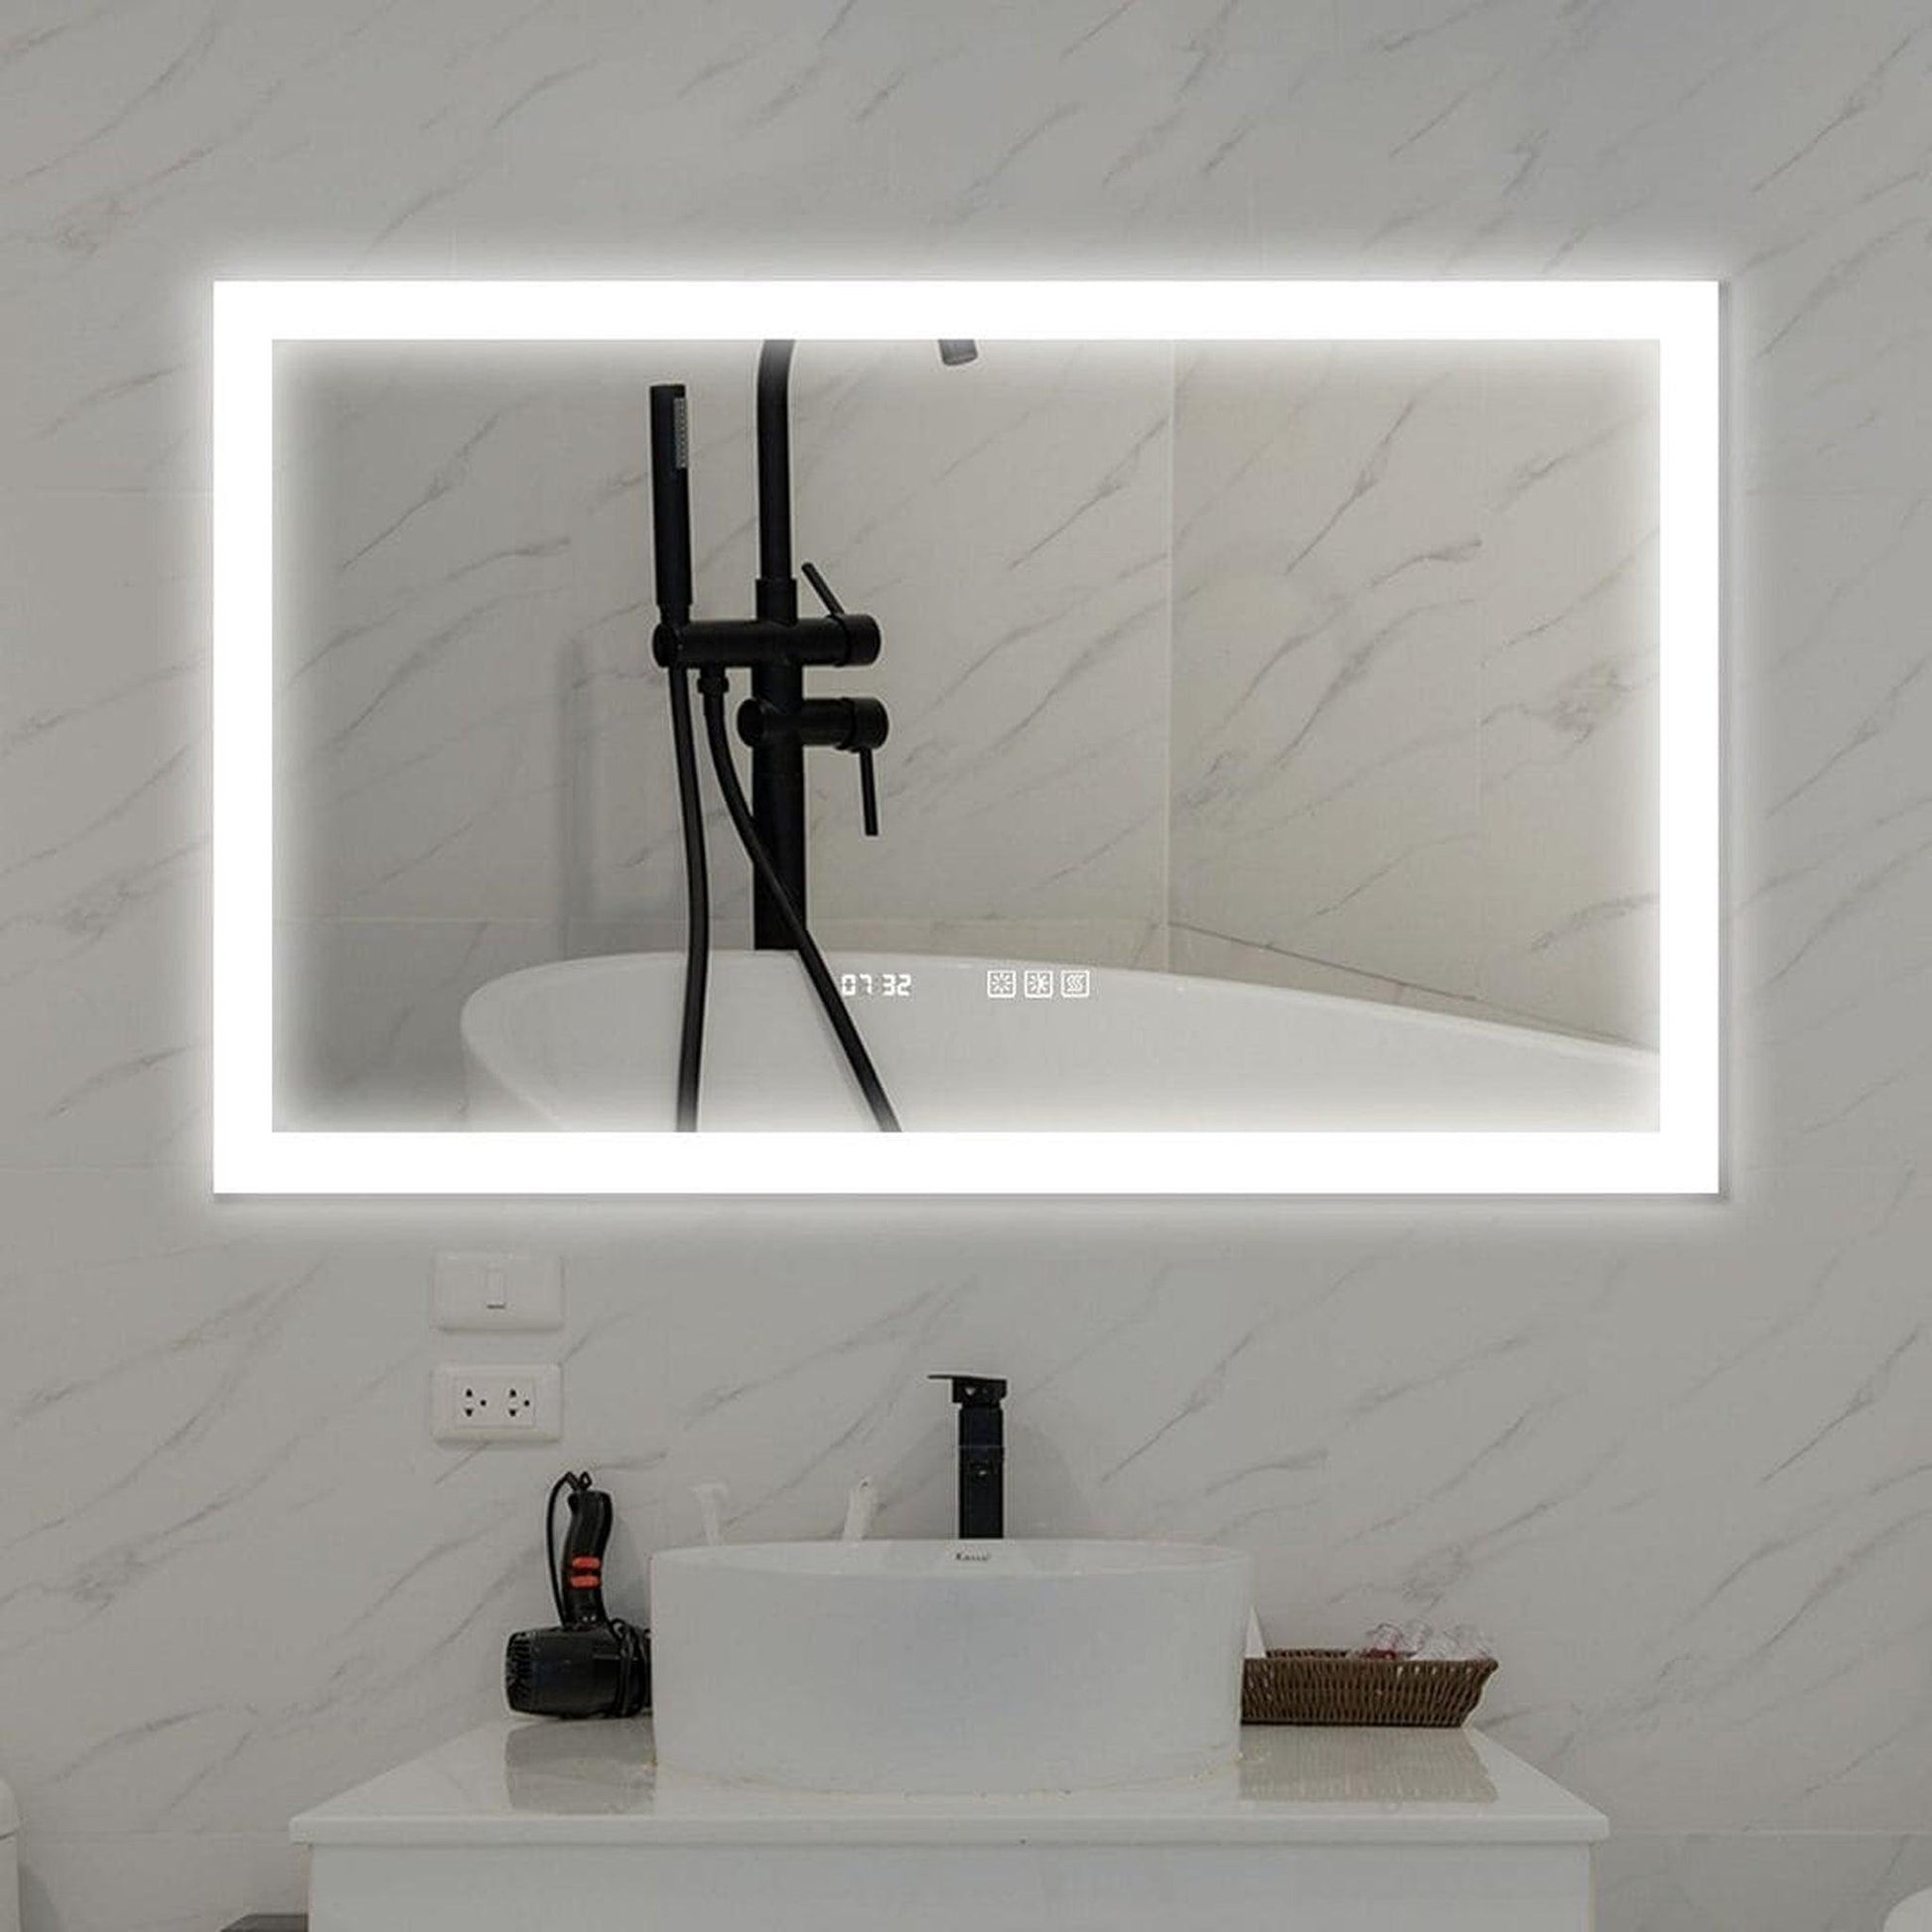 ExBrite Third Generation 40 x 24 Frameless Backlit LED Super Slim Bathroom Vanity Mirror with Clock, Night Light, Anti Fog, Dimmer, Touch Button and